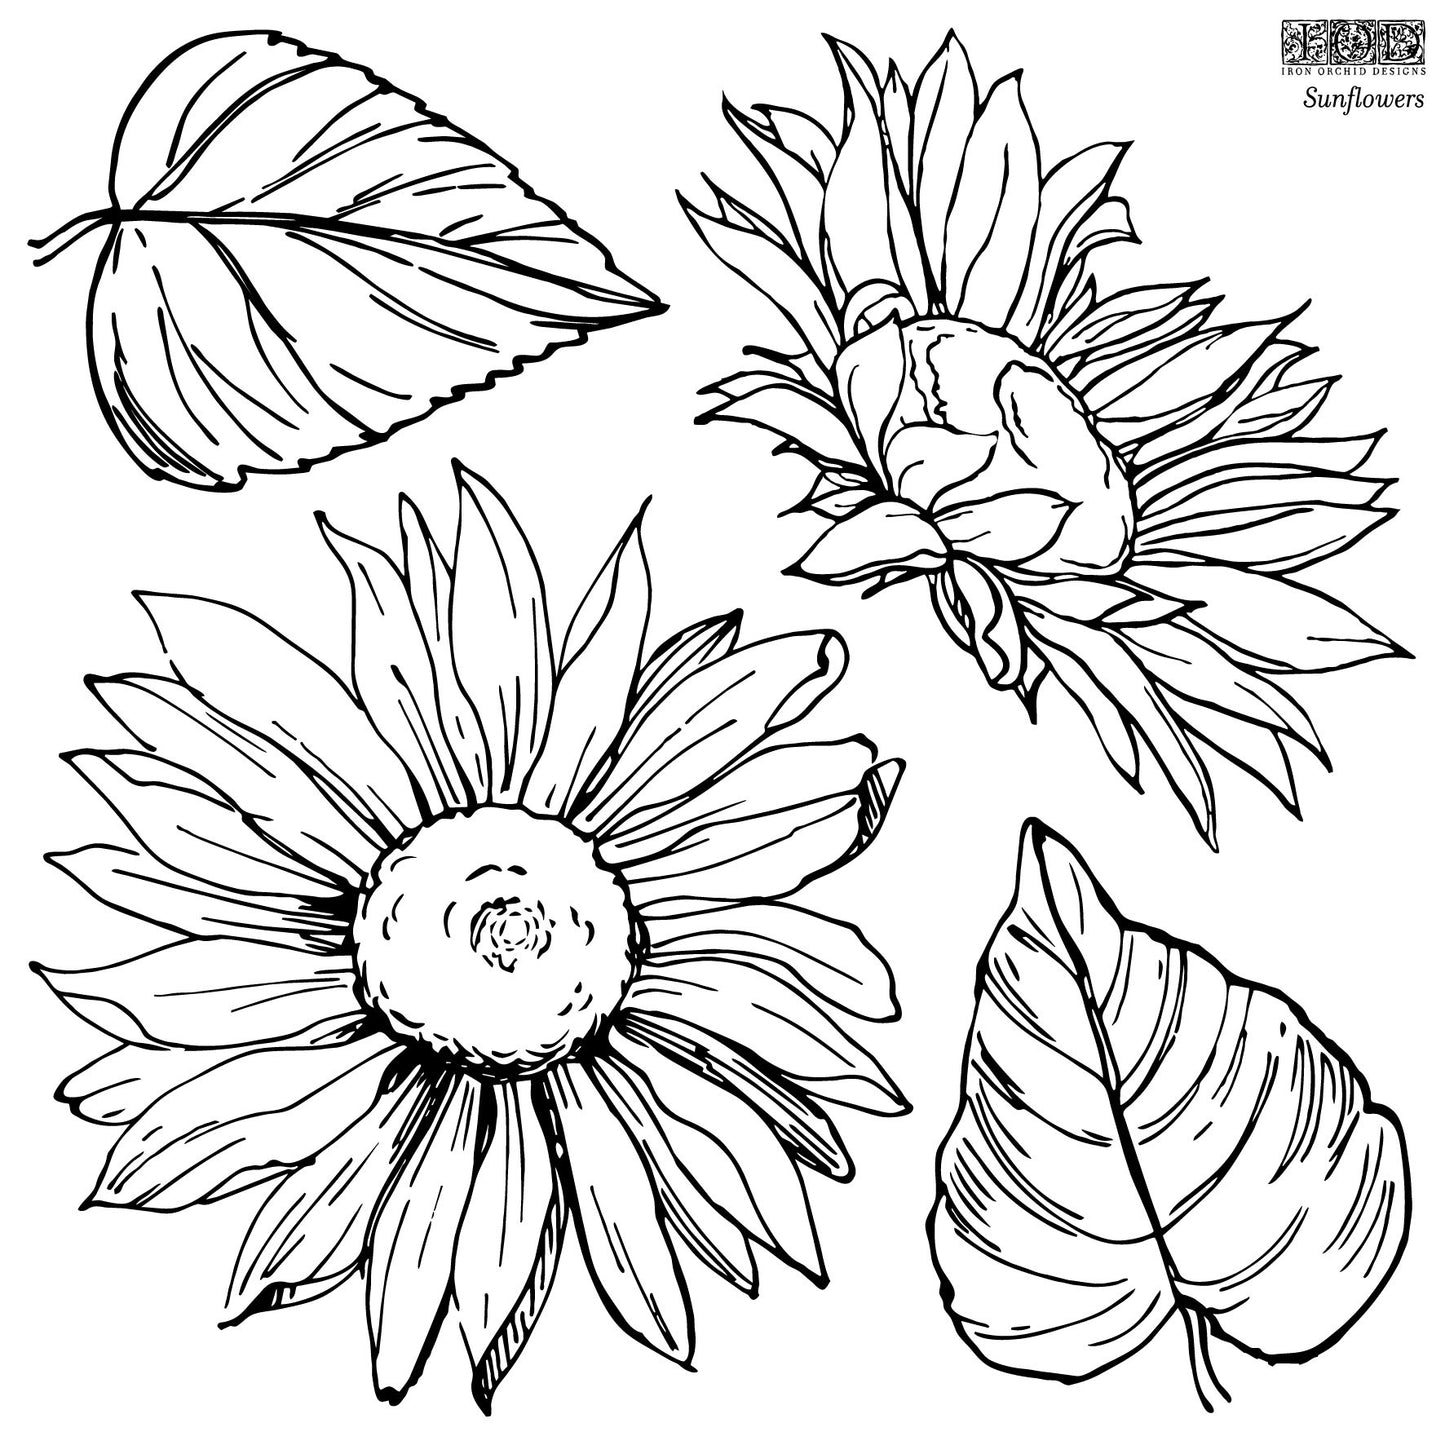 Iron Orchid Designs SUNFLOWERS 12×12 IOD STAMP